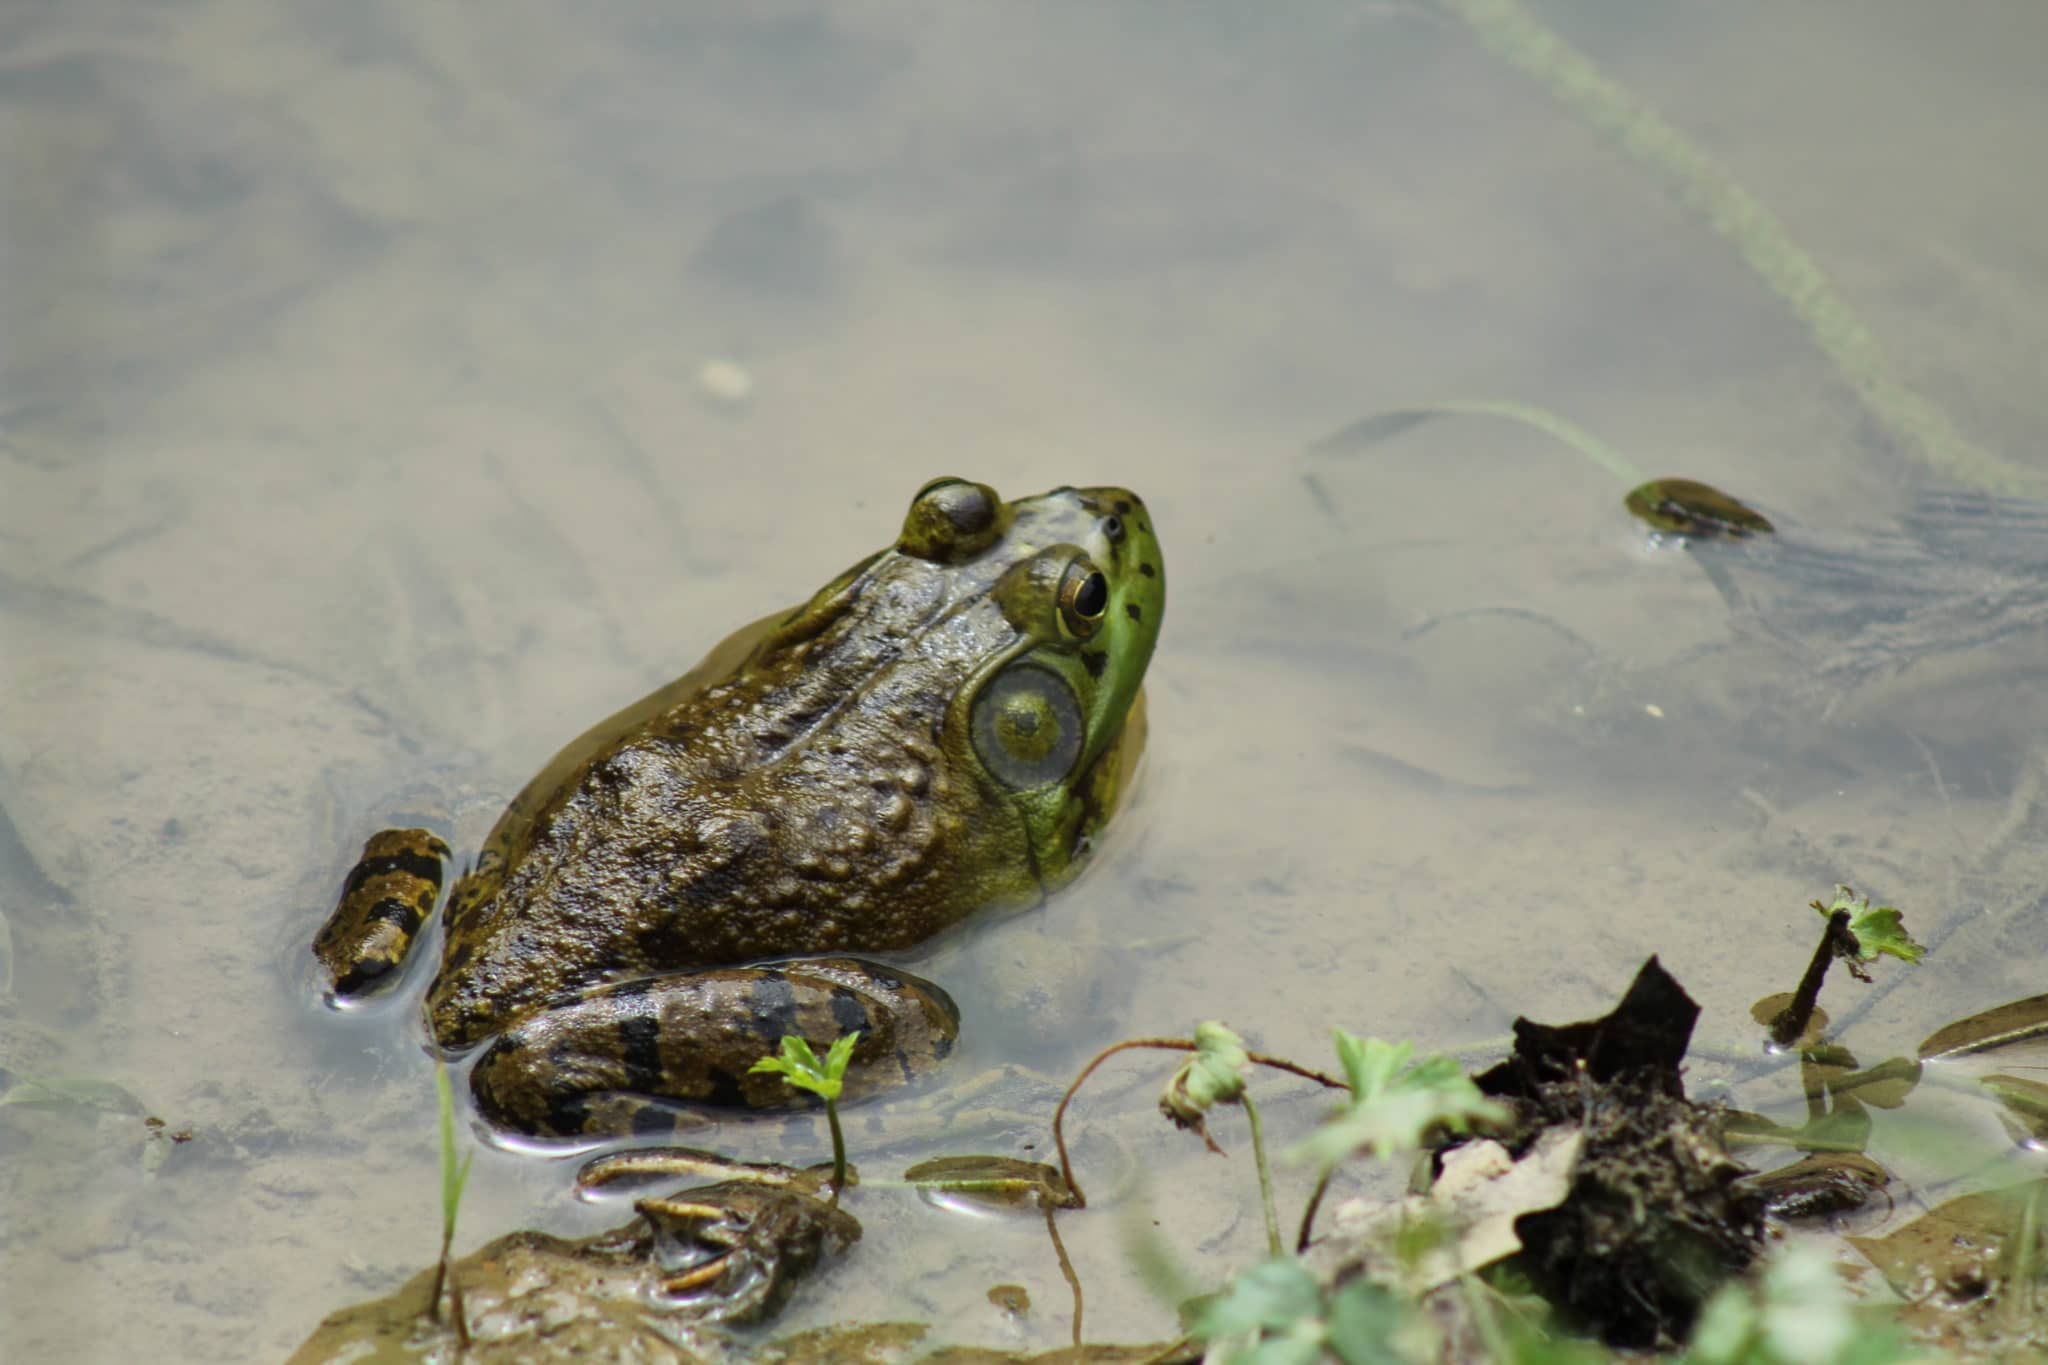 An image of a frog sitting in water